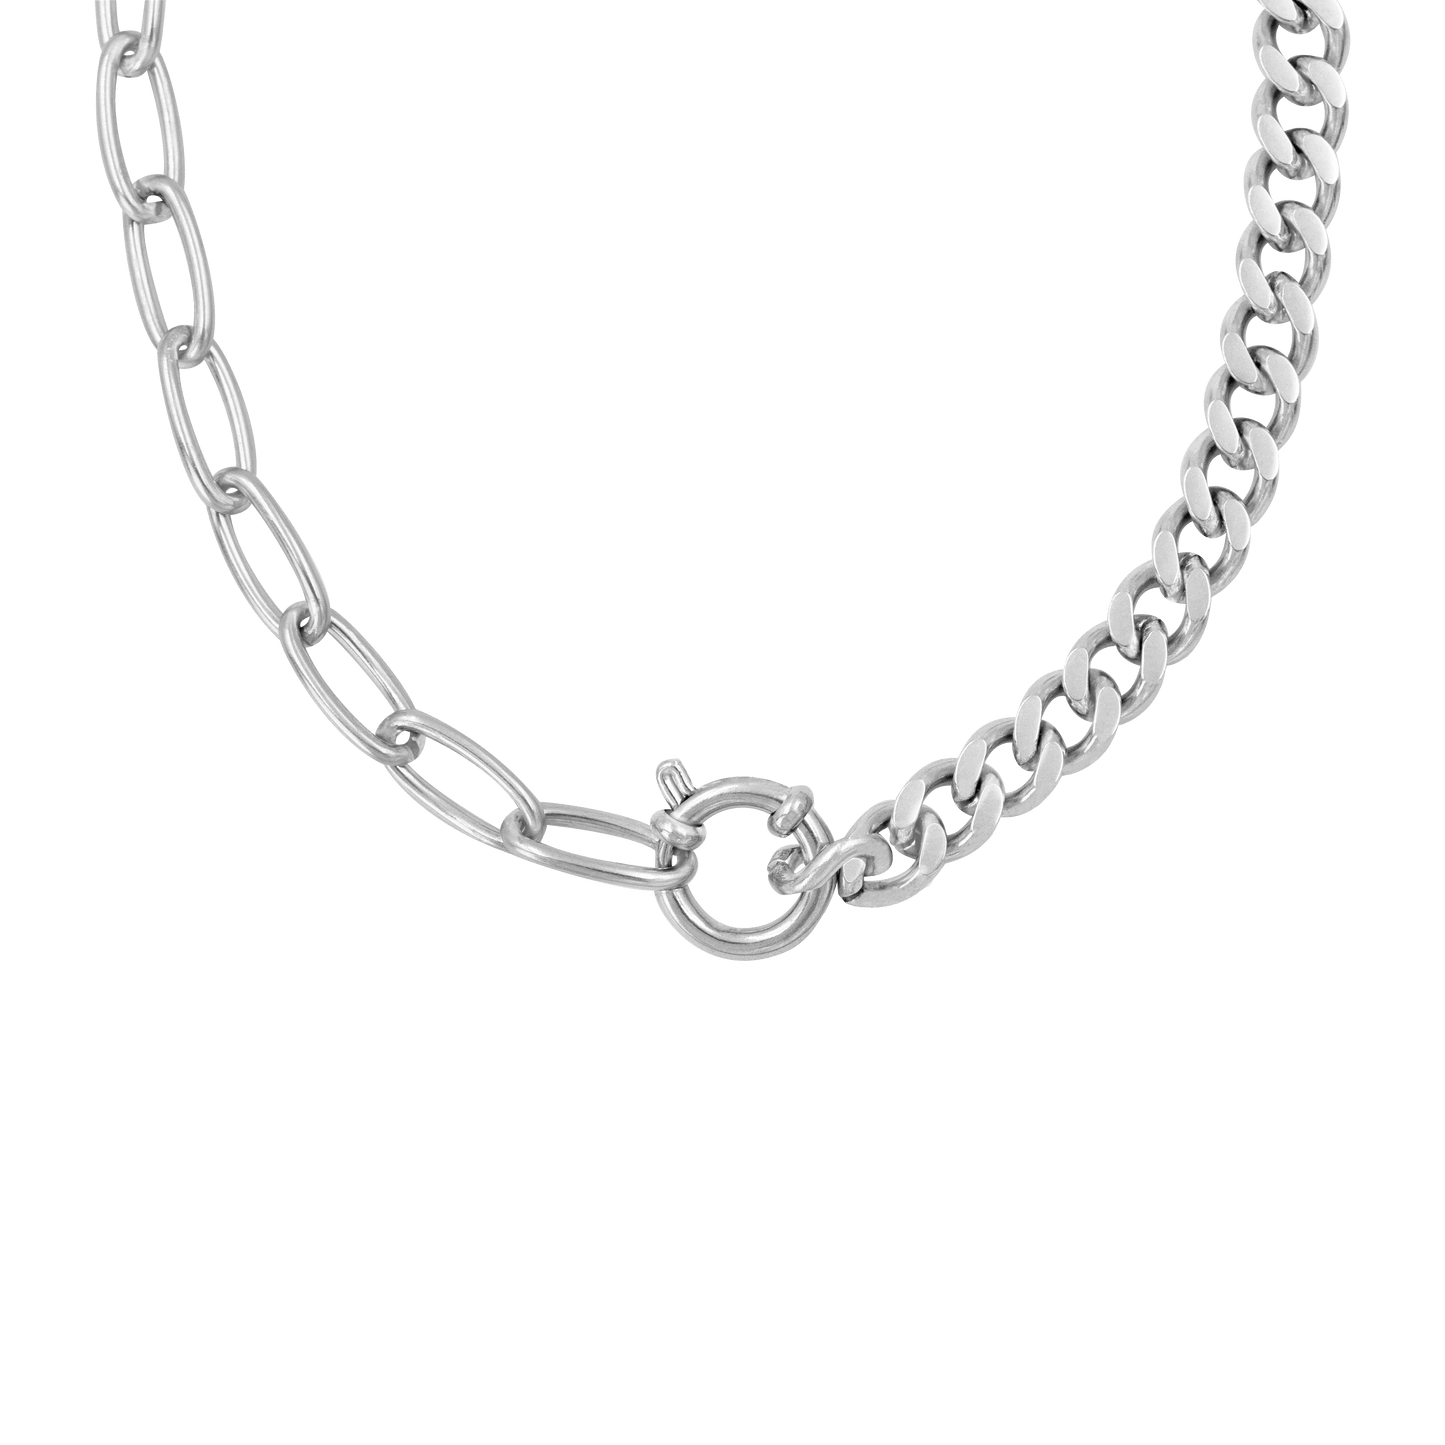 Same but Different Necklace Silver